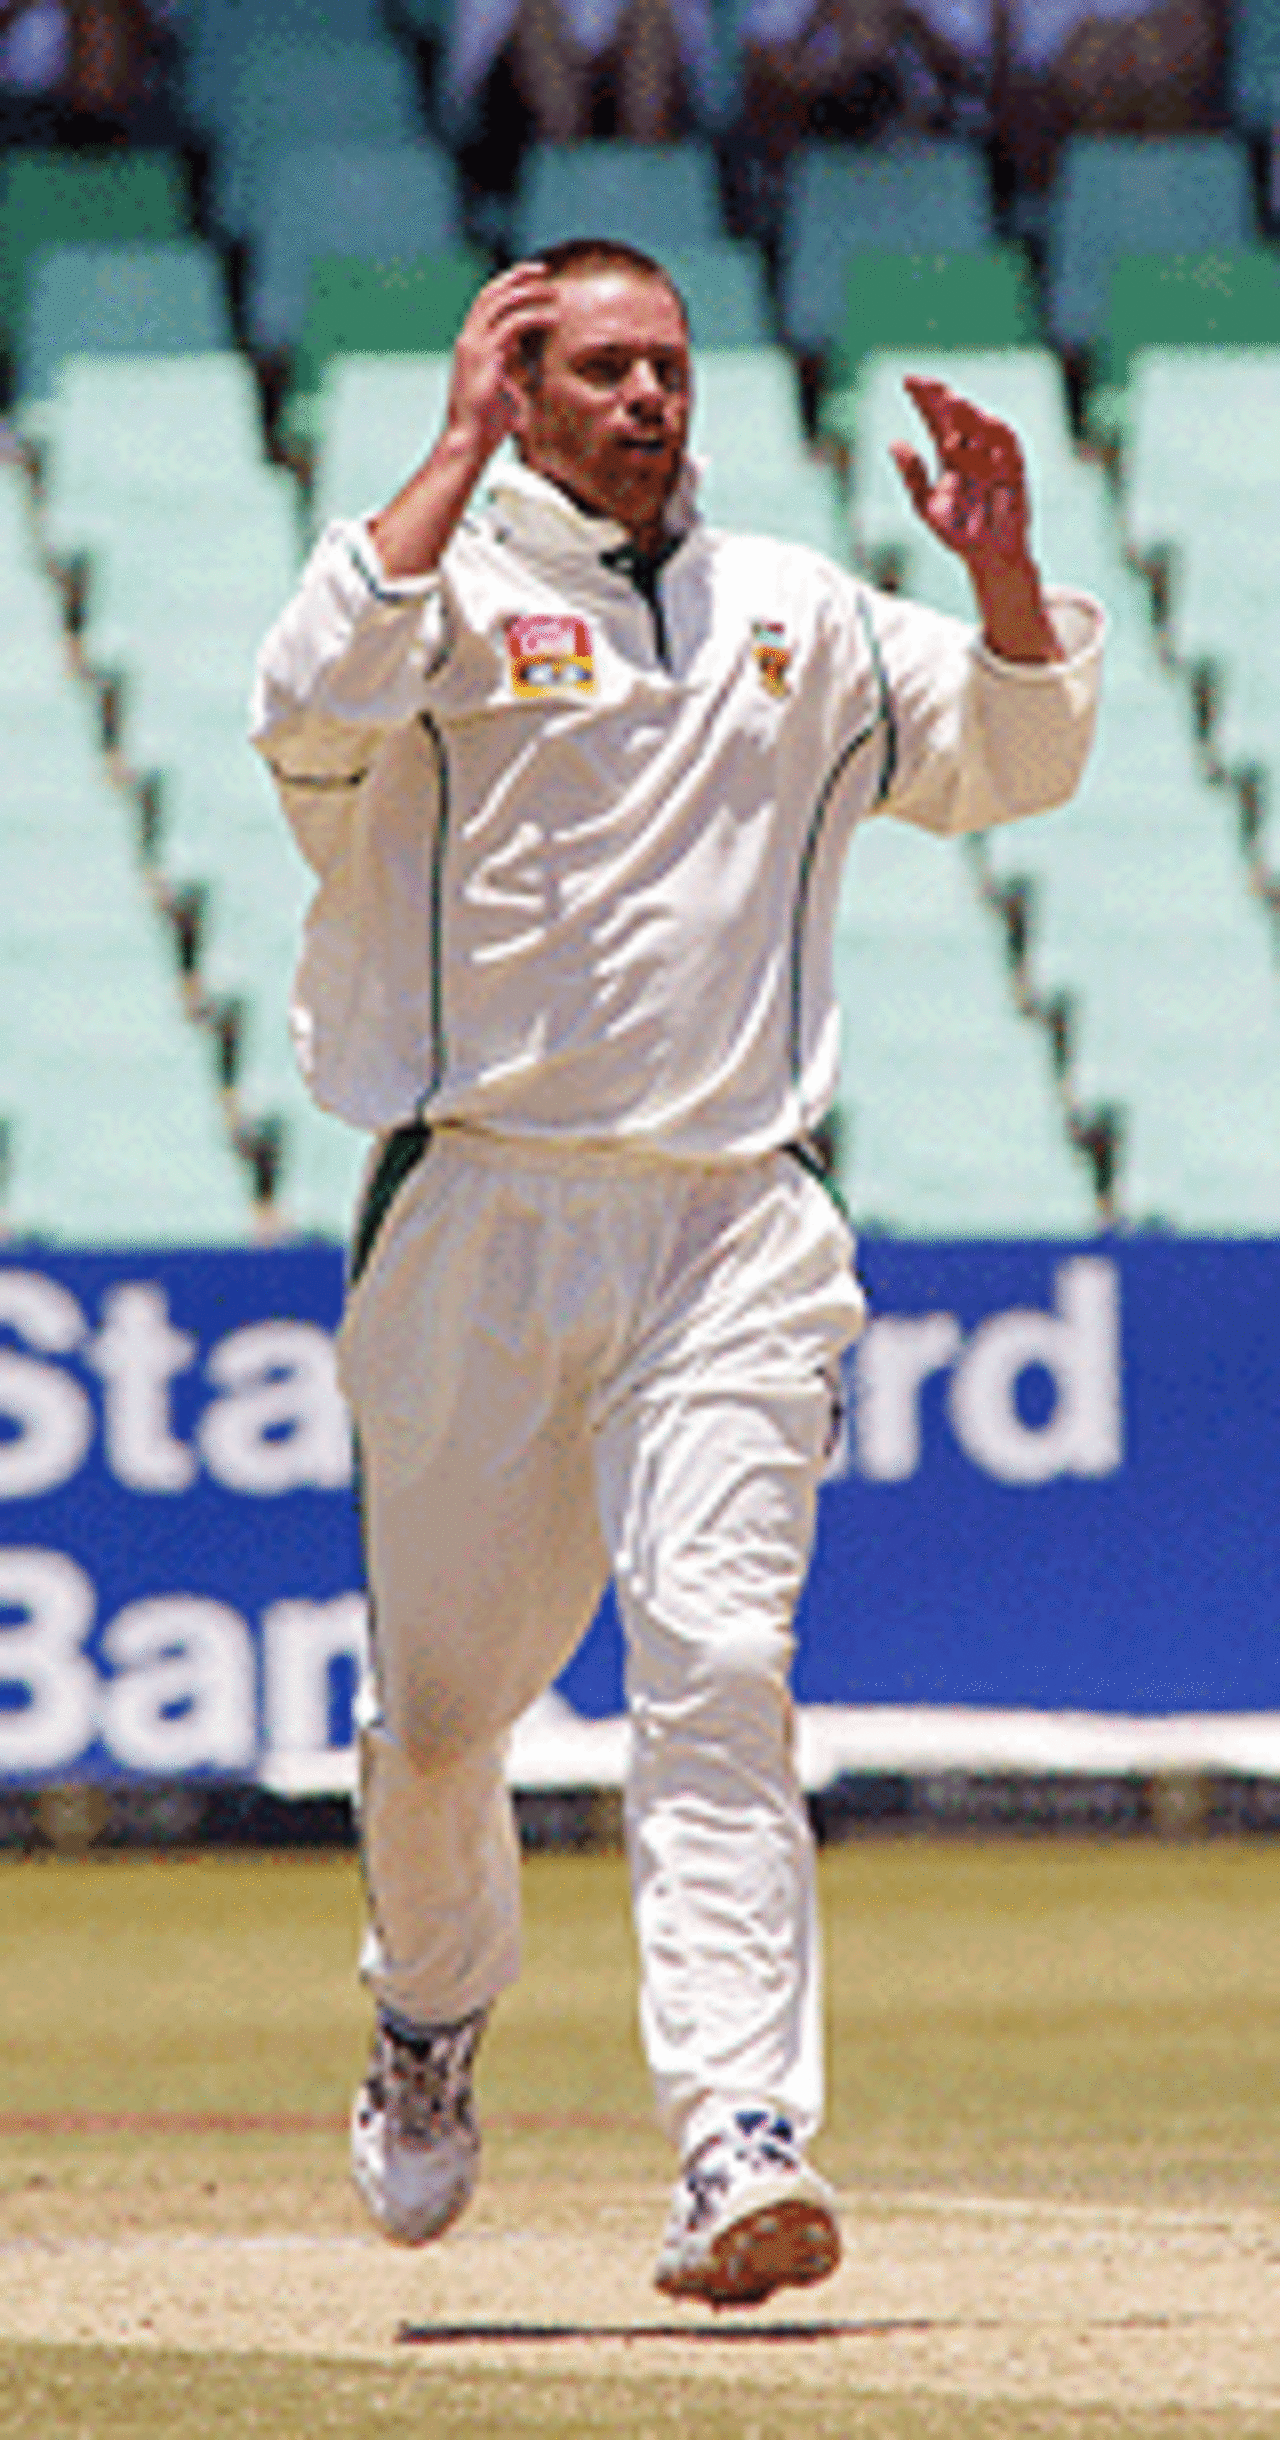 Andrew Hall celebrates a wicket, South Africa v West Indies, 2nd Test, Durban, 4th day, December 29, 2003